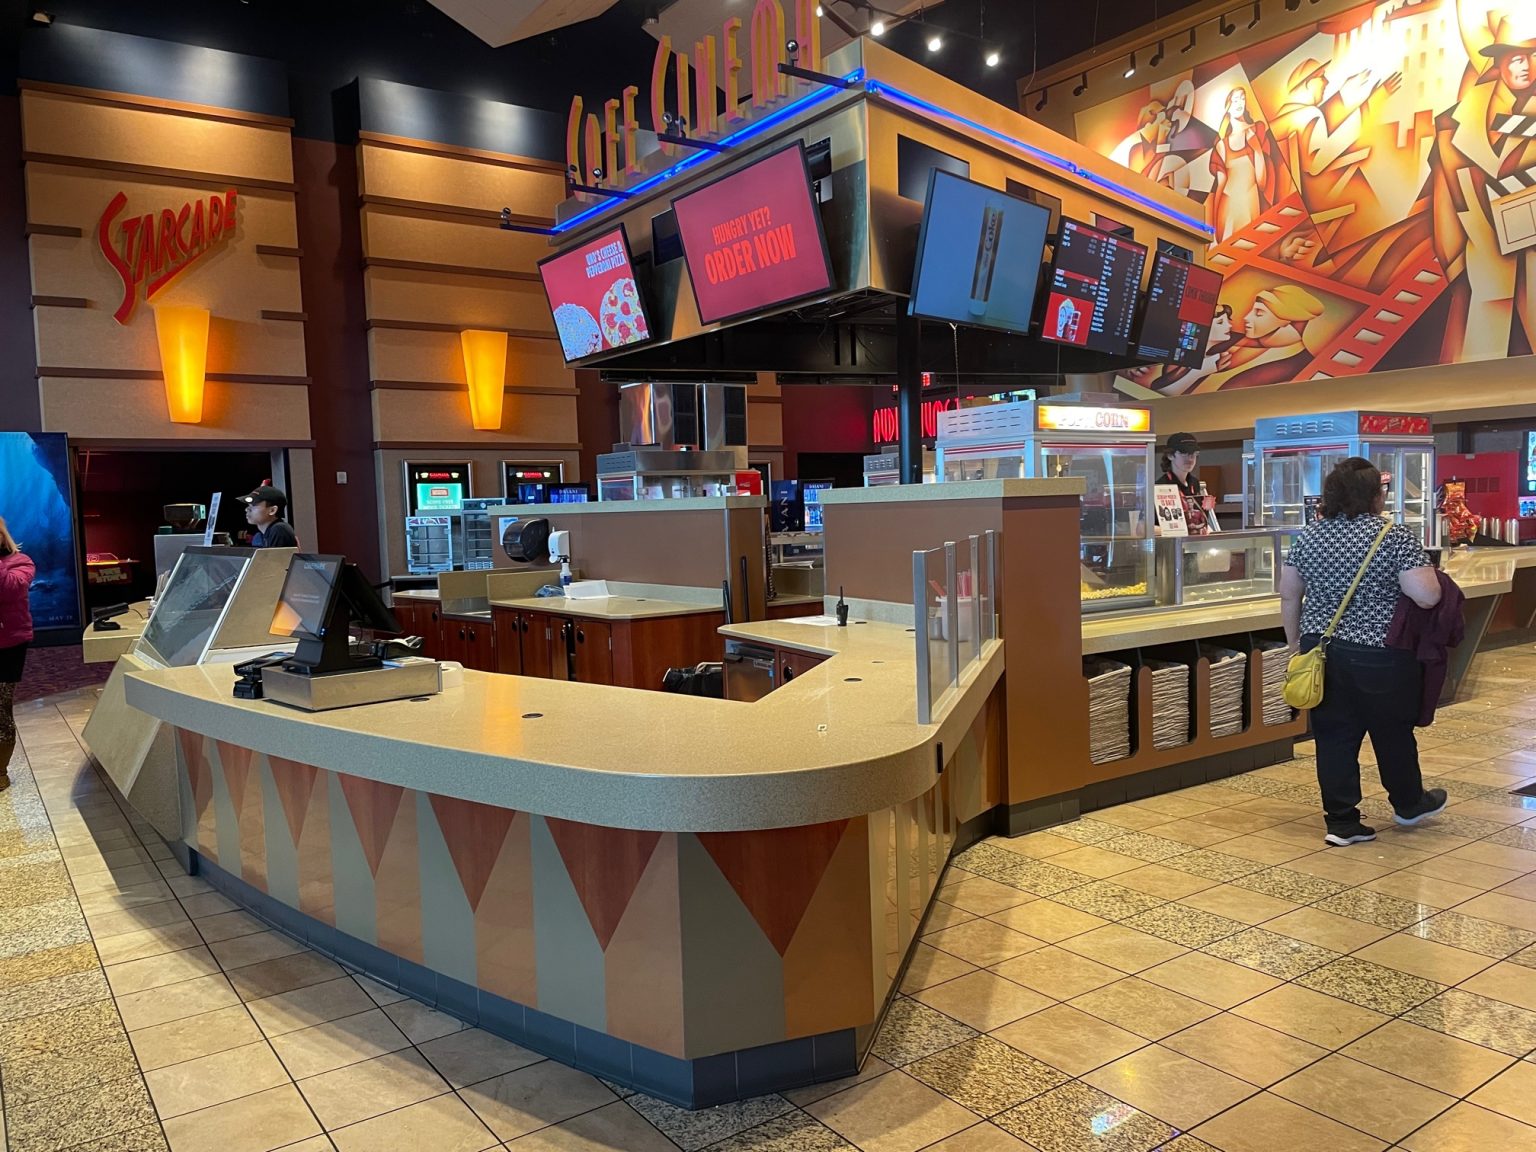 It’s an Experience See What You’ve Been Missing at Cinemark Theatres